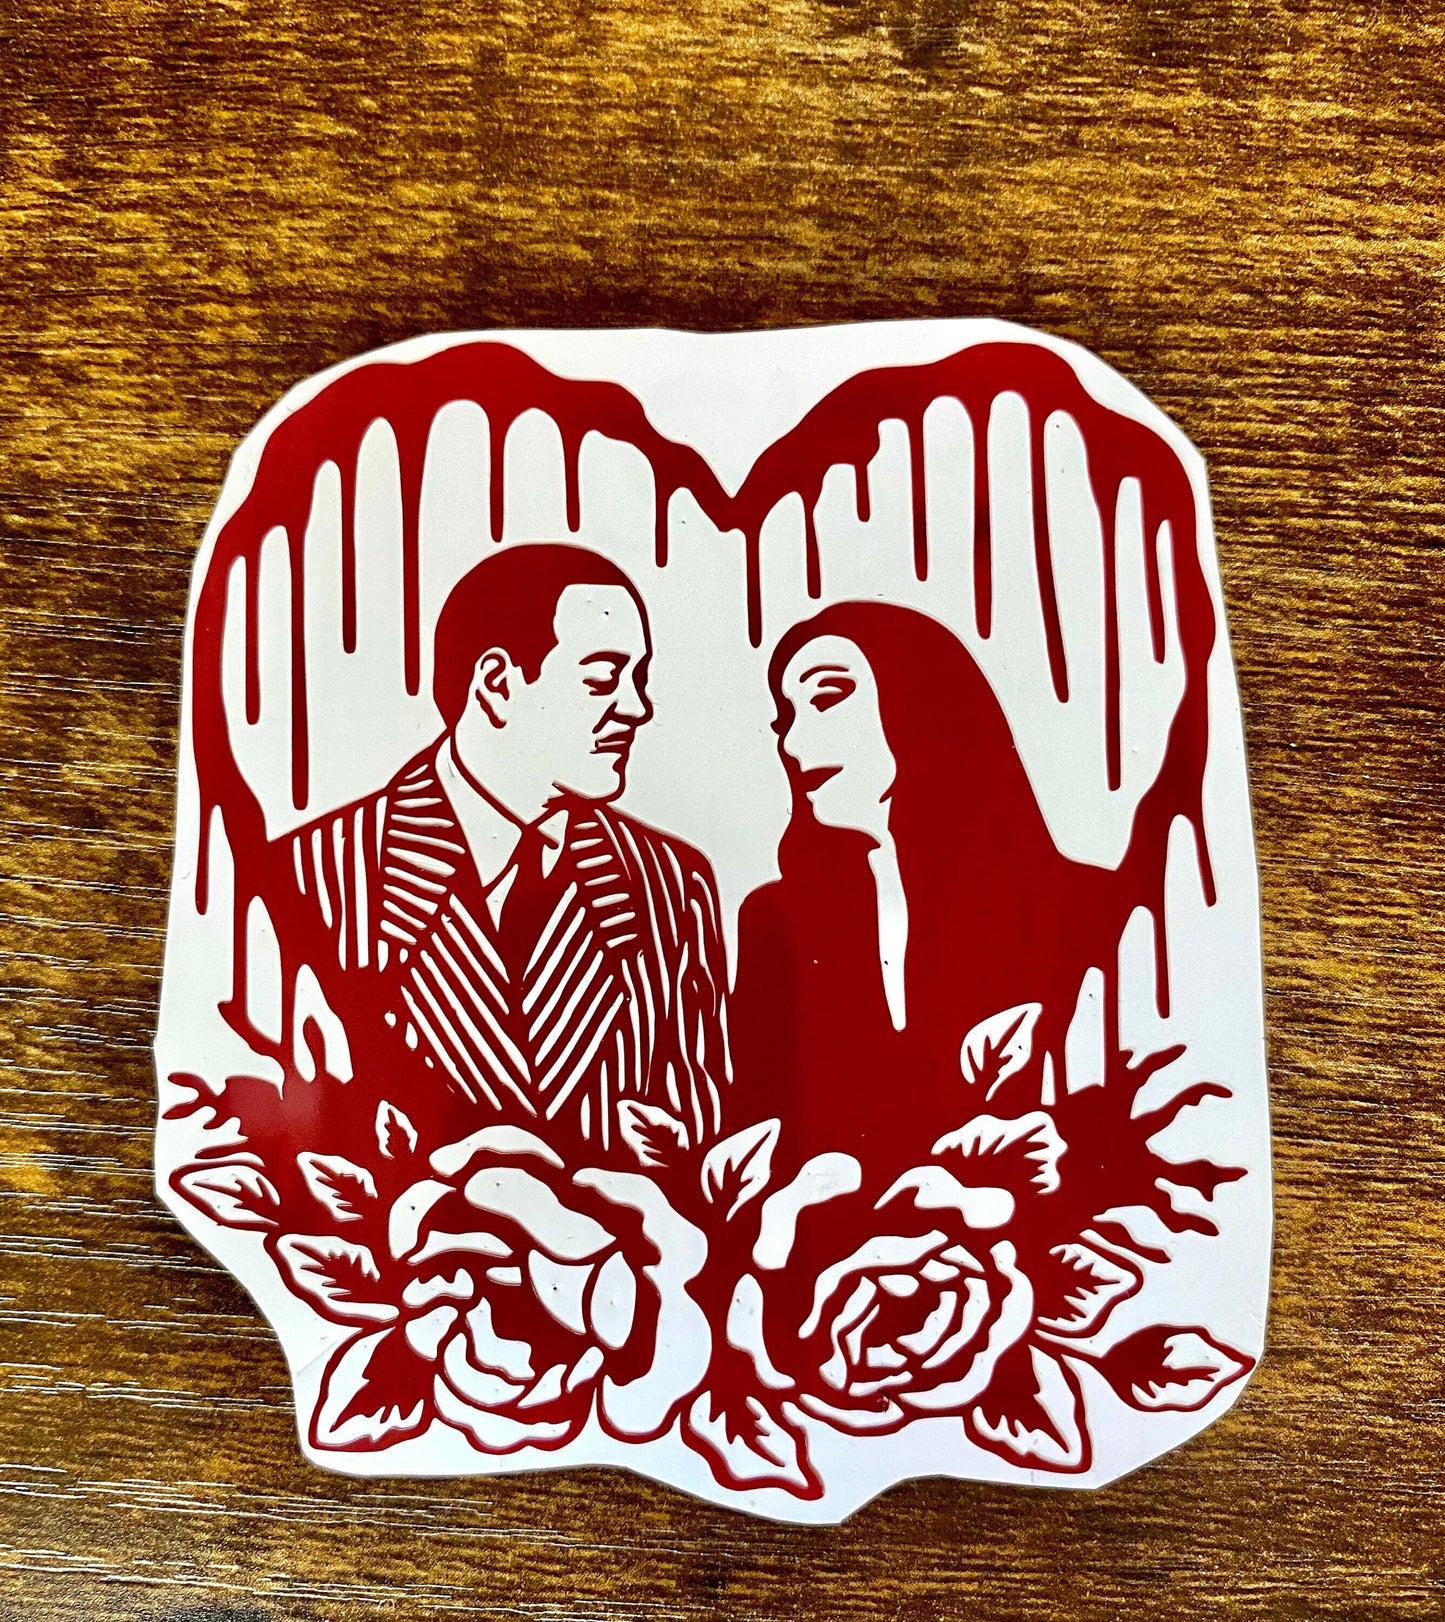 Shadow Witch Designs 1. holographic opal The Addams Family Morticia and Gomez Heart Valentine Vinyl Decal Horror Couple 13460373990